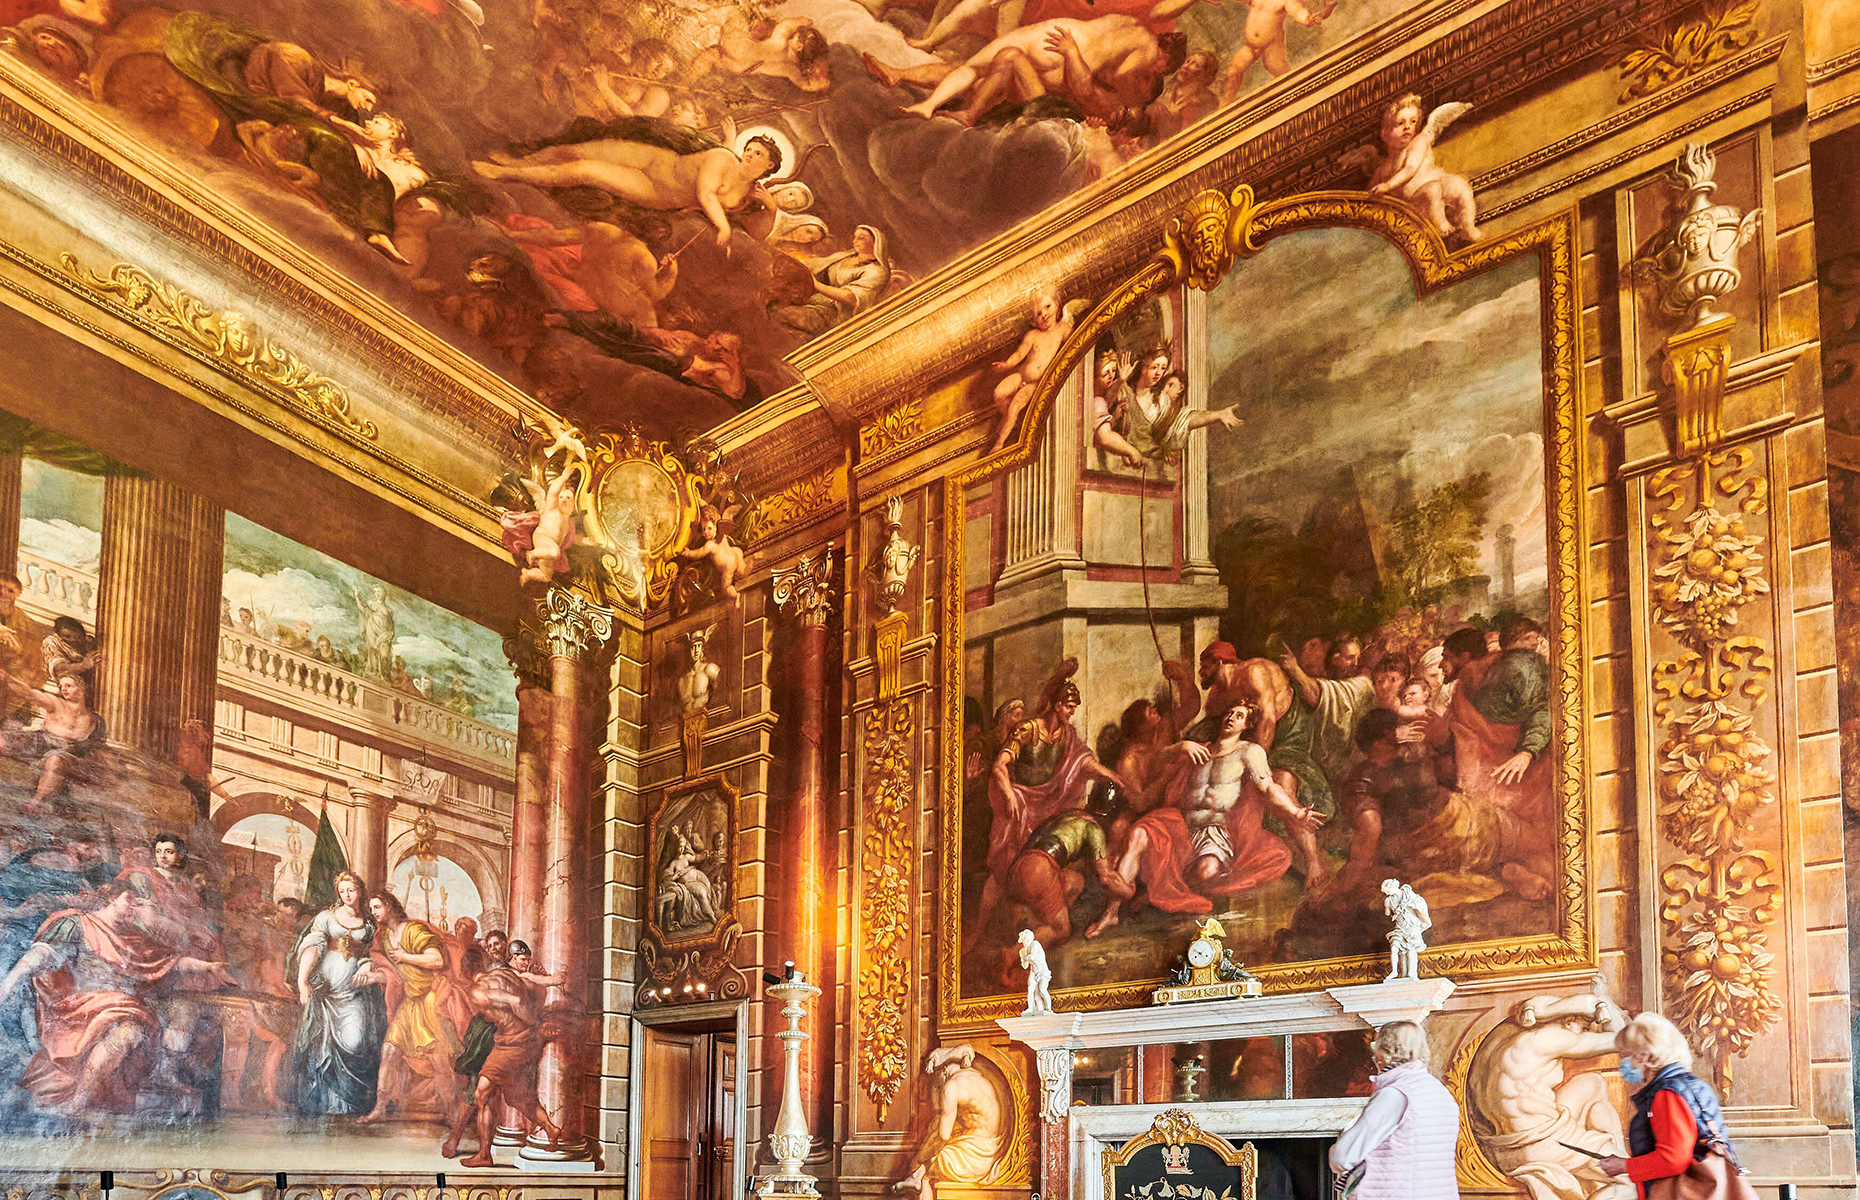 <p>Arguably the most significant contribution commissioned by the couple were the two murals which completely cover the walls <em>and</em> ceilings of the ‘Heaven Room’ (pictured here) and the ‘Hell Staircase,’ named, rather dramatically for the classical scenes they show.</p>  <p>The murals were painted by famous <a href="https://www.historichouses.org/all-there-is-in-heaven-and-hell/">Italian Baroque artist Antonio Verrio in the 1690s</a>, and are one of the most famous attractions in the estate. And you cannot really miss them due to their size anyway!</p>